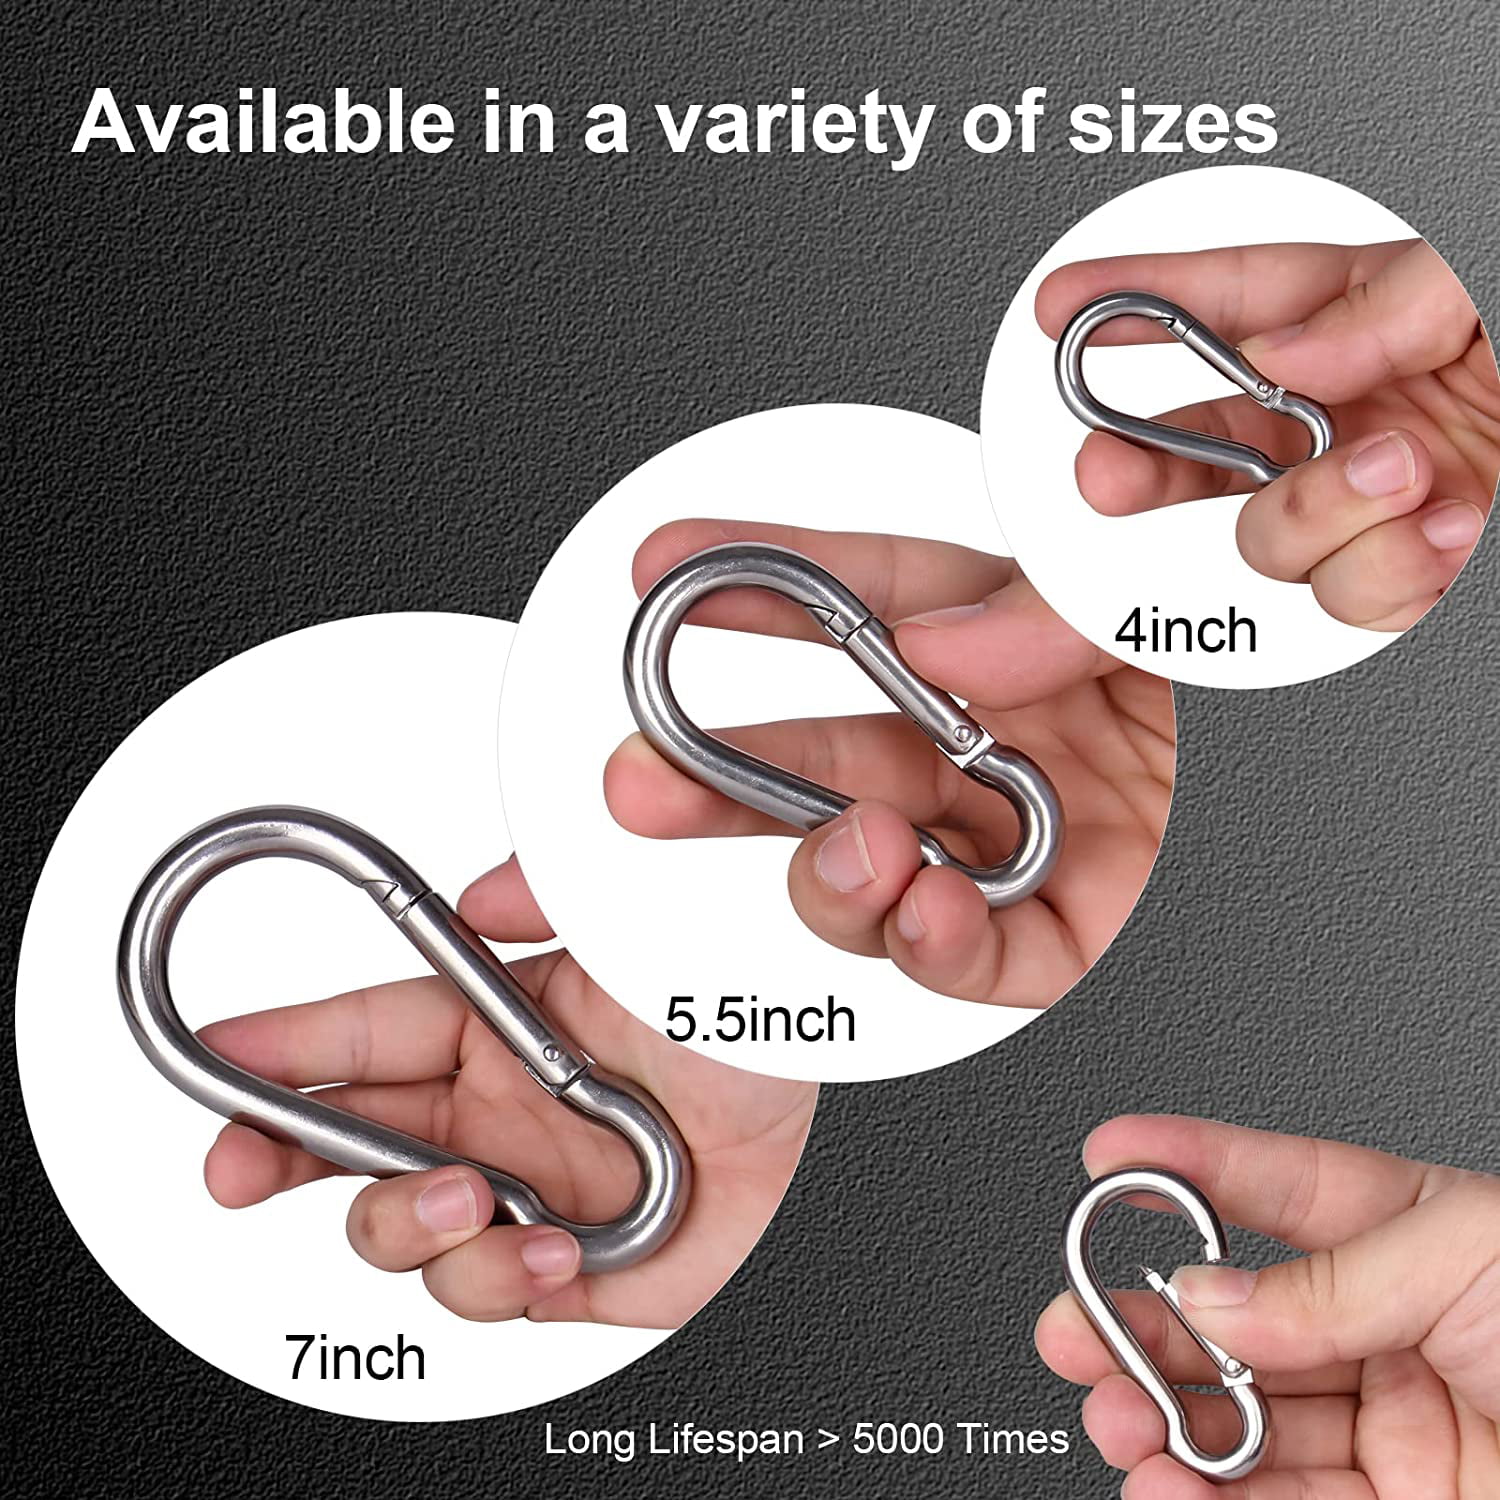 2 Pack 304 Stainless Steel Carabiner Clip, 5.5 inch Heavy Duty Spring Snap  Hook, Large Caribeener Clips for Camping, Swing Set, Hammock, Hiking,  Travel, Weight Lifting Machine, Home Gym Equipment 